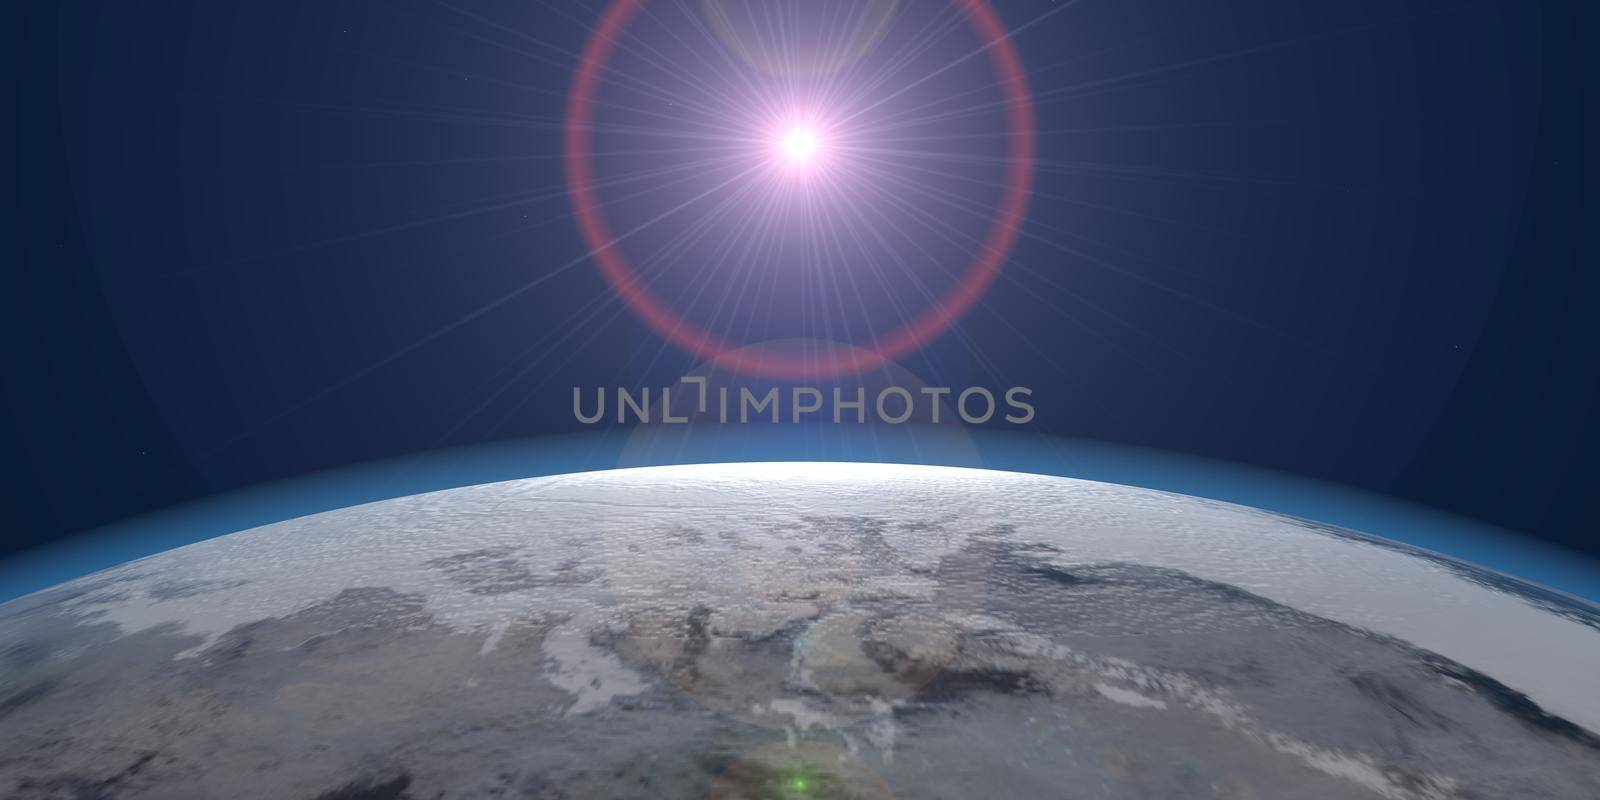 Sunrise over the planet panorama, 3d render illustration